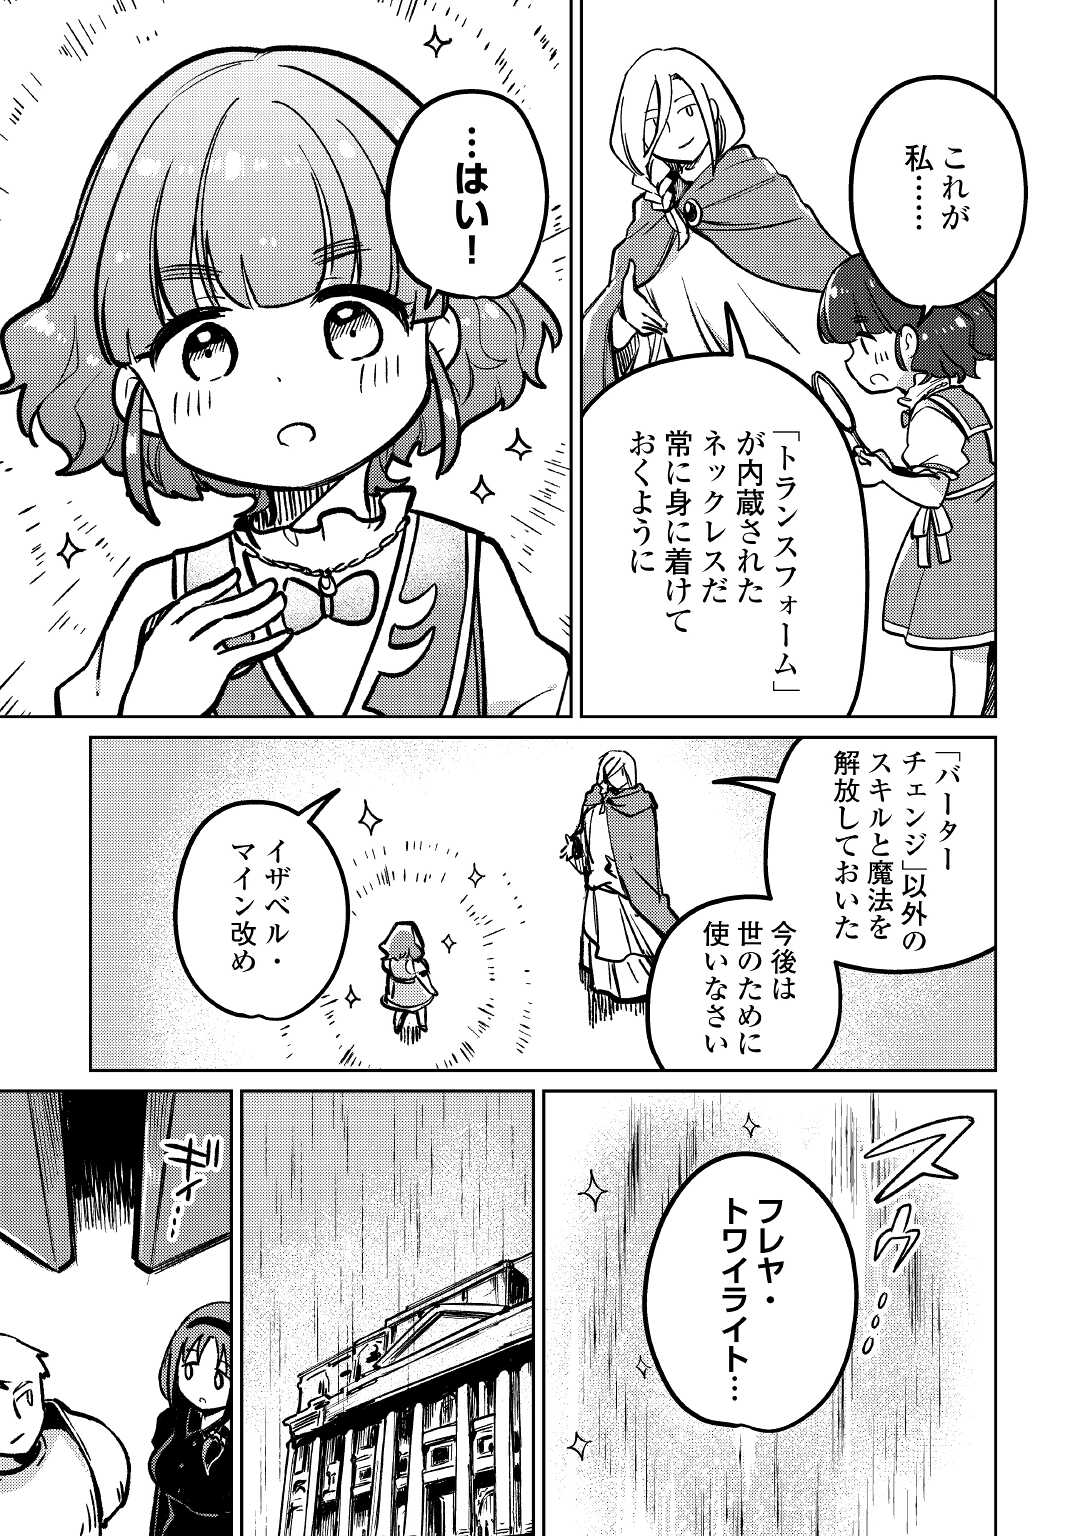 The Former Structural Researcher’s Story of Otherworldly Adventure 第38話 - Page 13